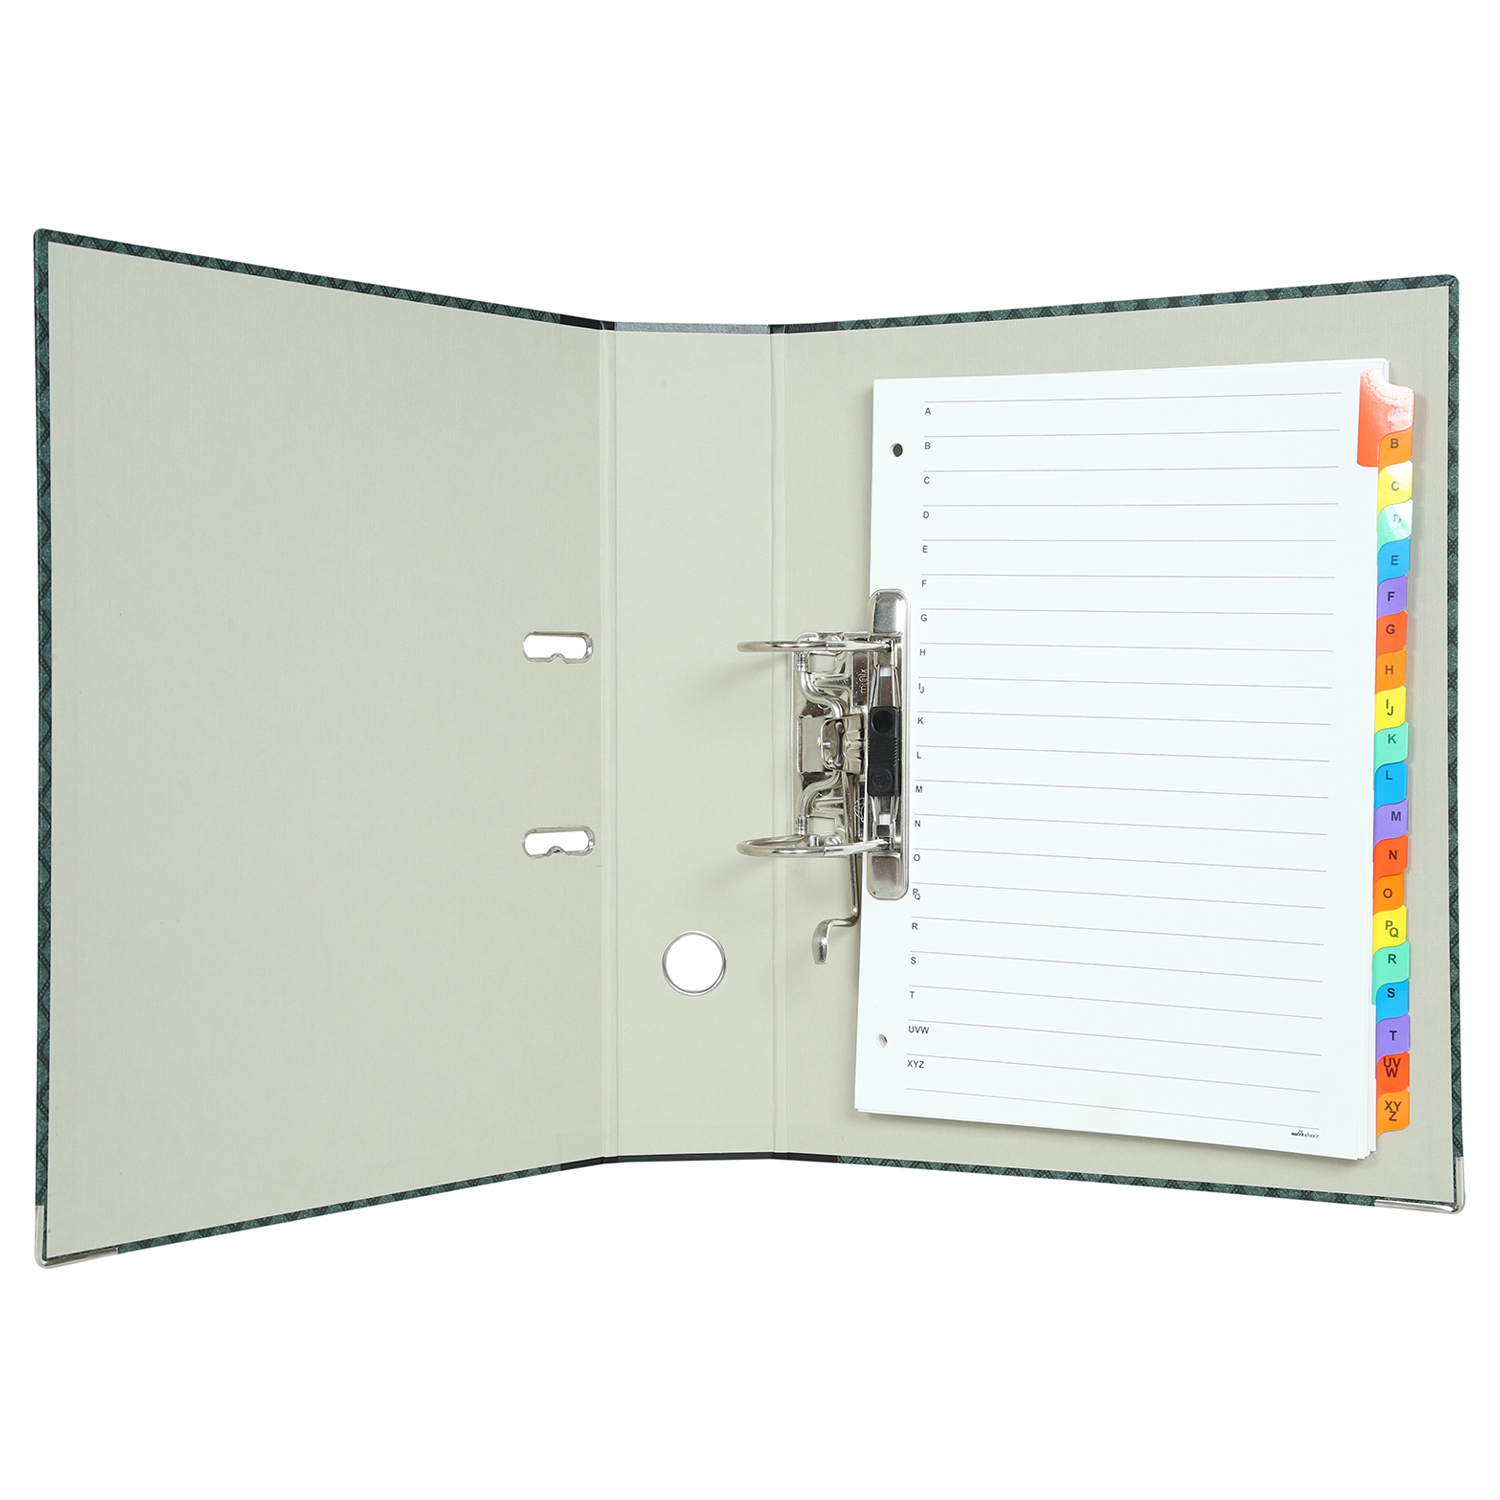 Mahavir Superior- Foolscap Size - Lever Arch File 2 Hole (Cream and Green)